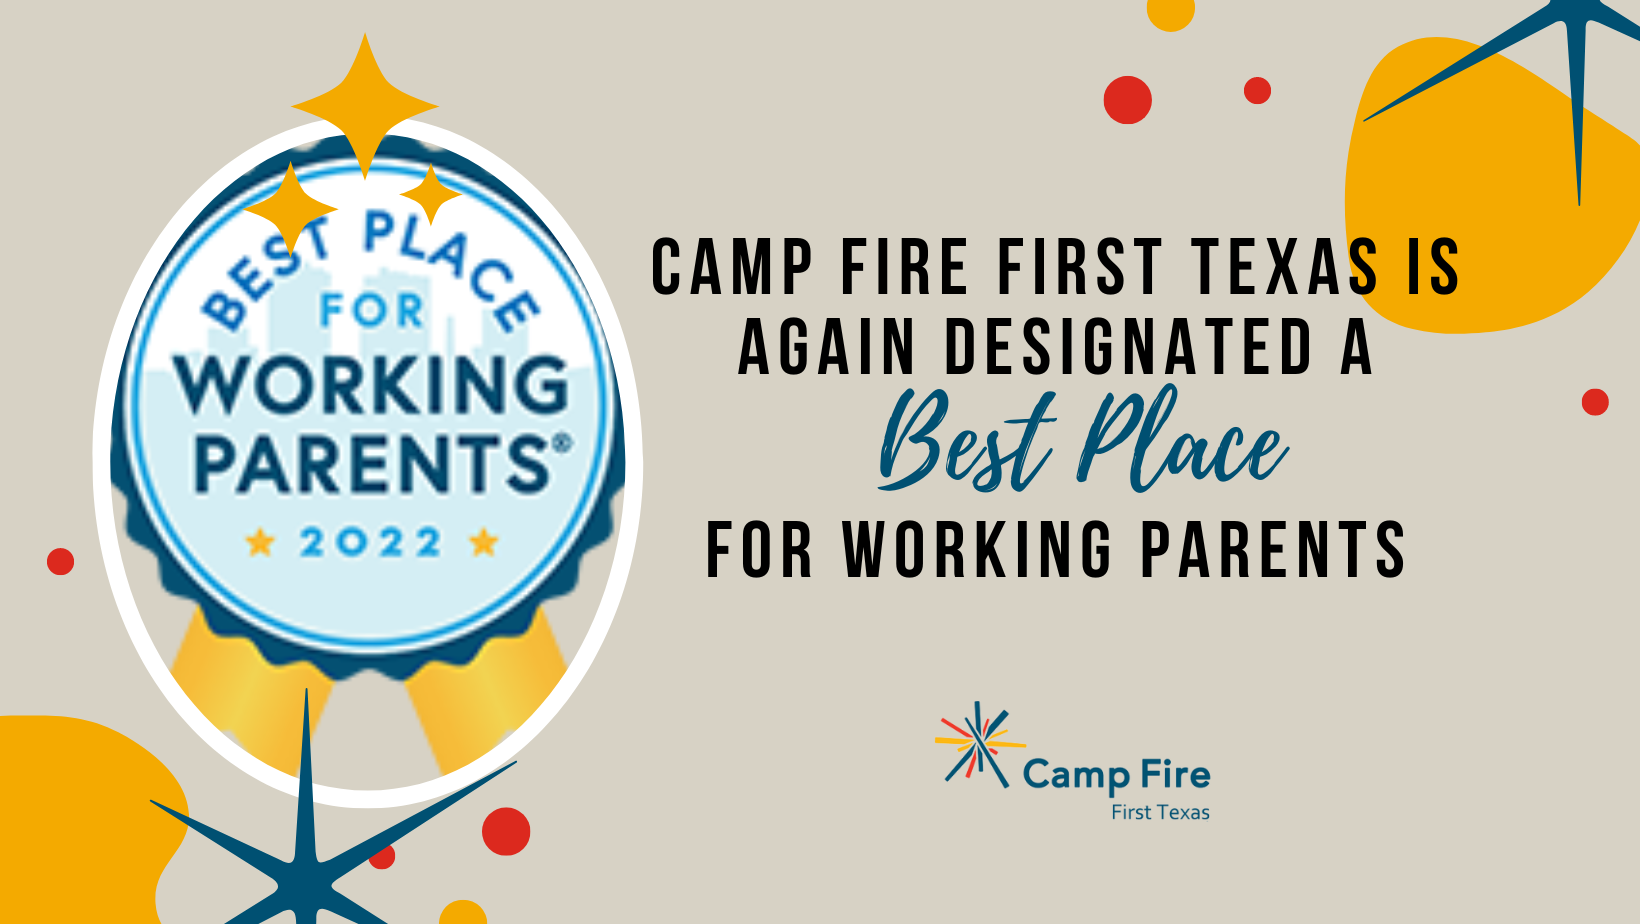 Camp Fire First Texas is Again Designated a Best Place For Working Parents, a Camp Fire First Texas blog